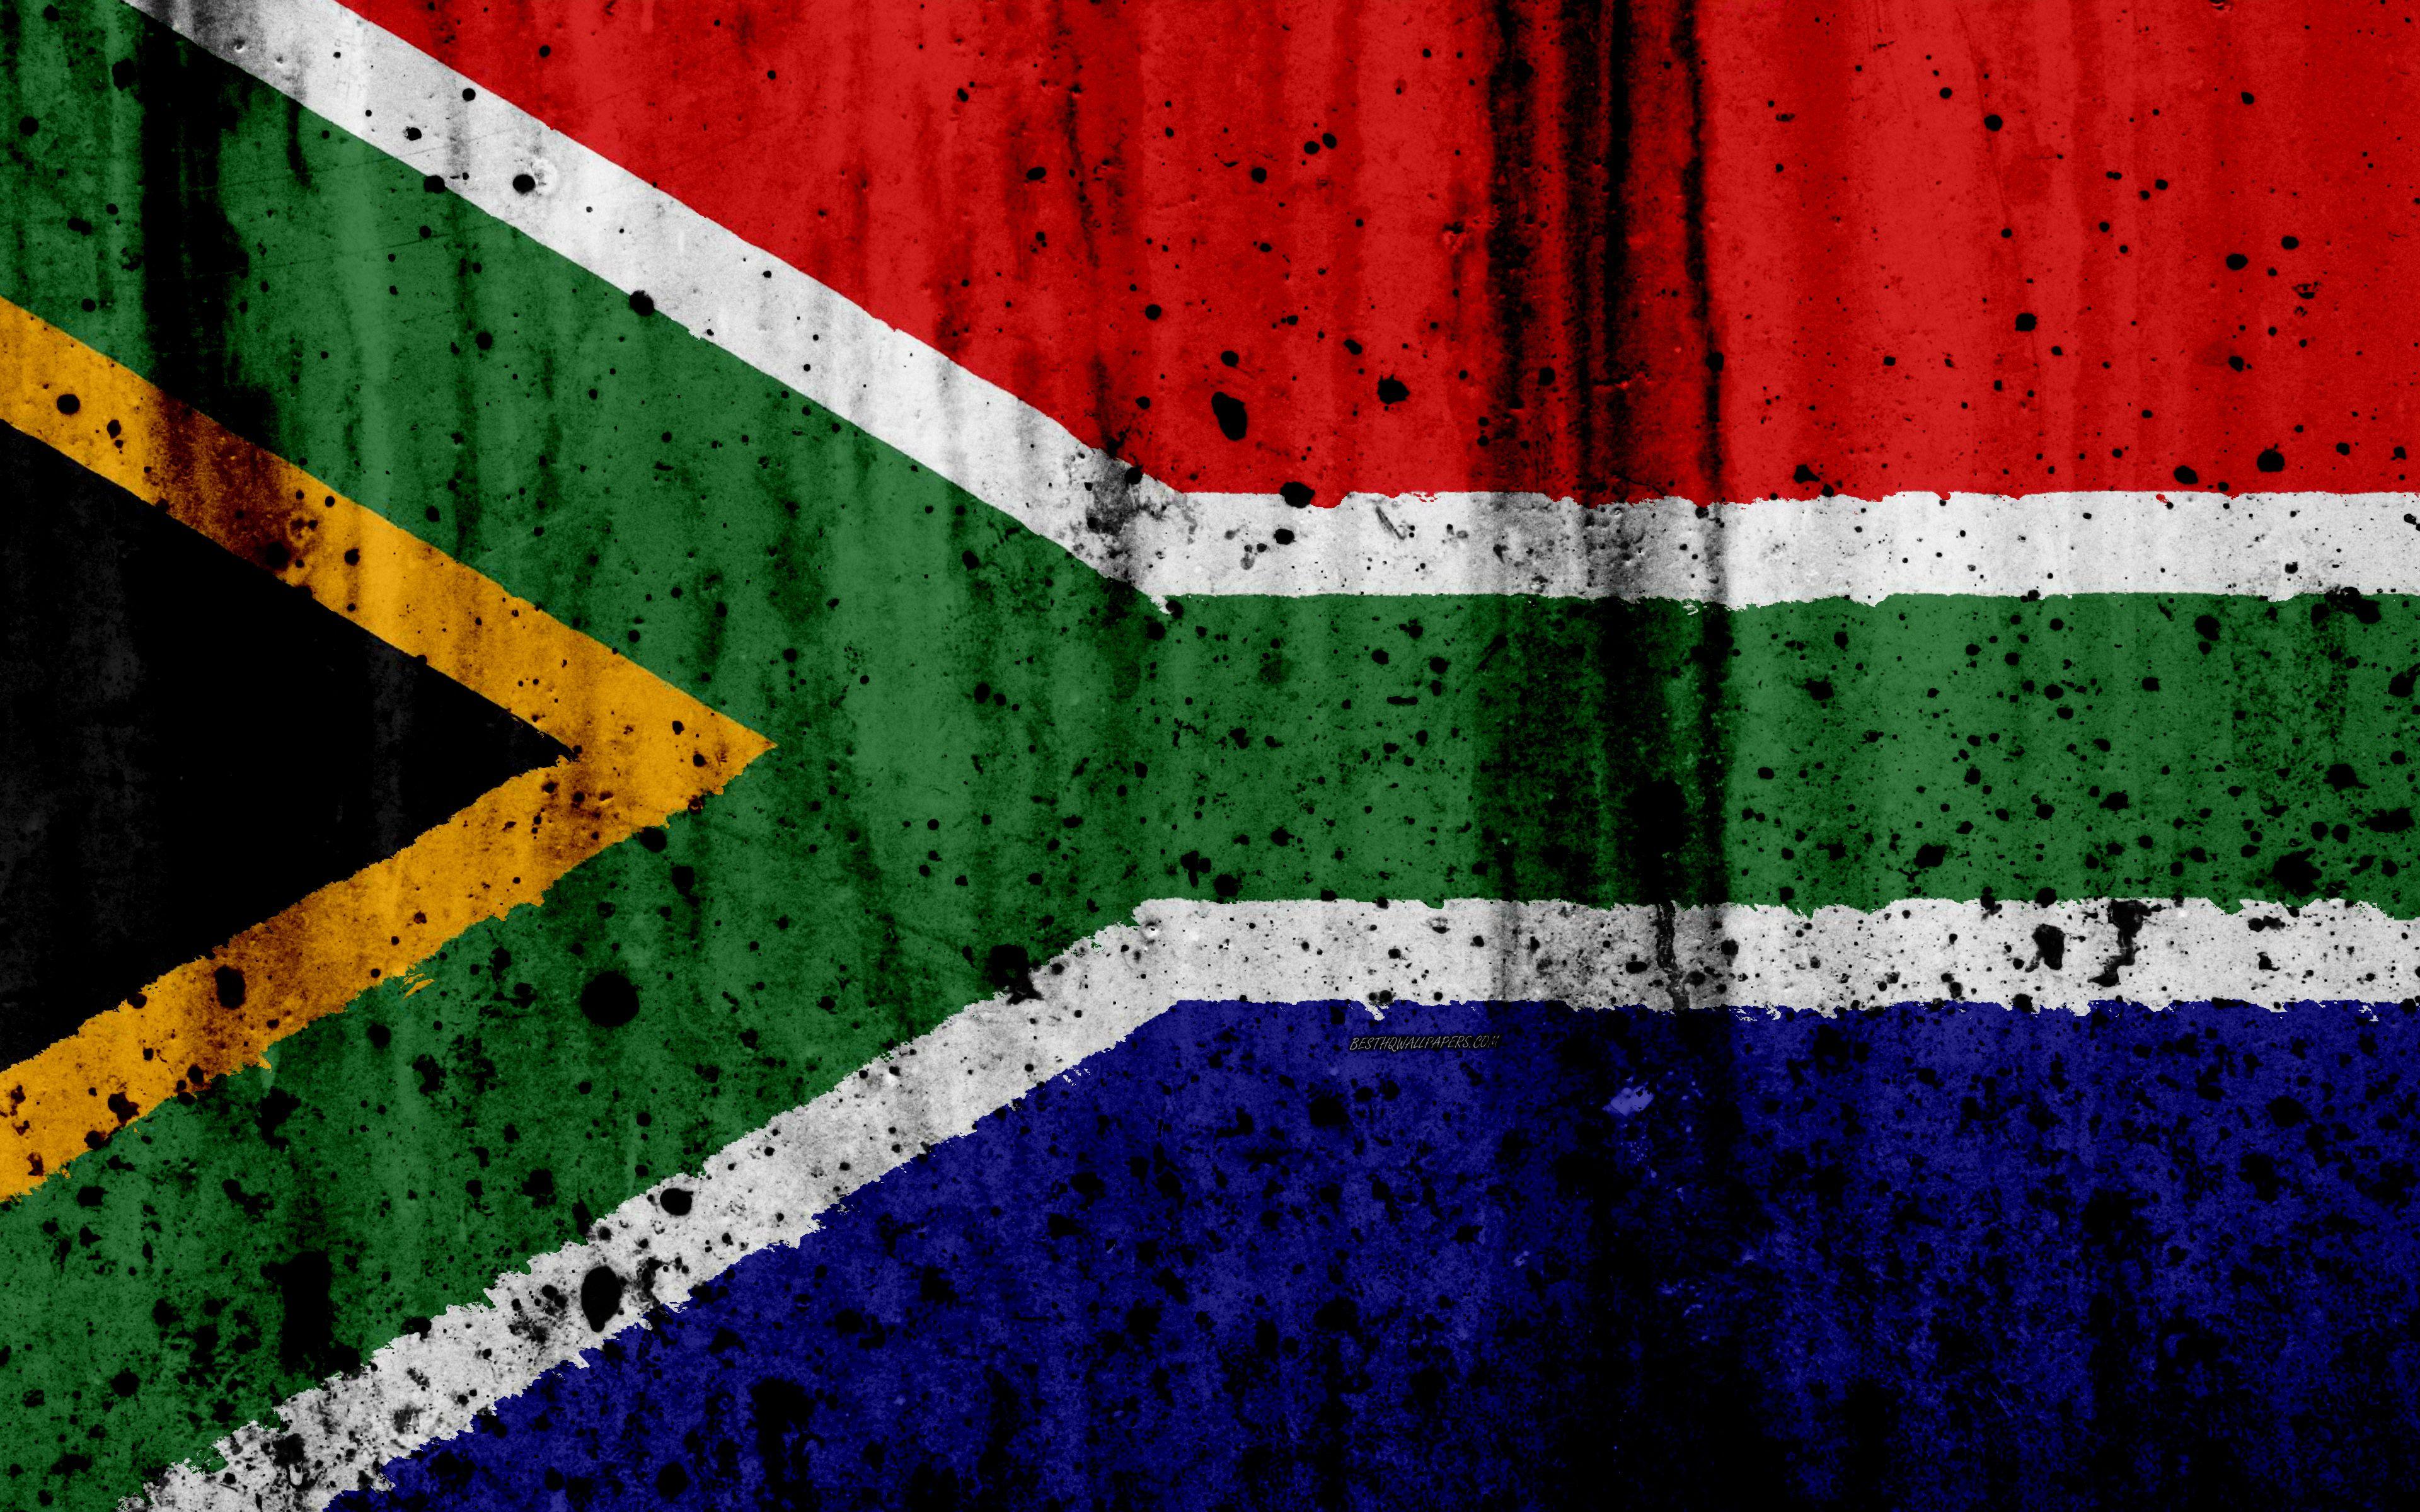 South African Flag Wallpapers Top Free South African Flag Backgrounds